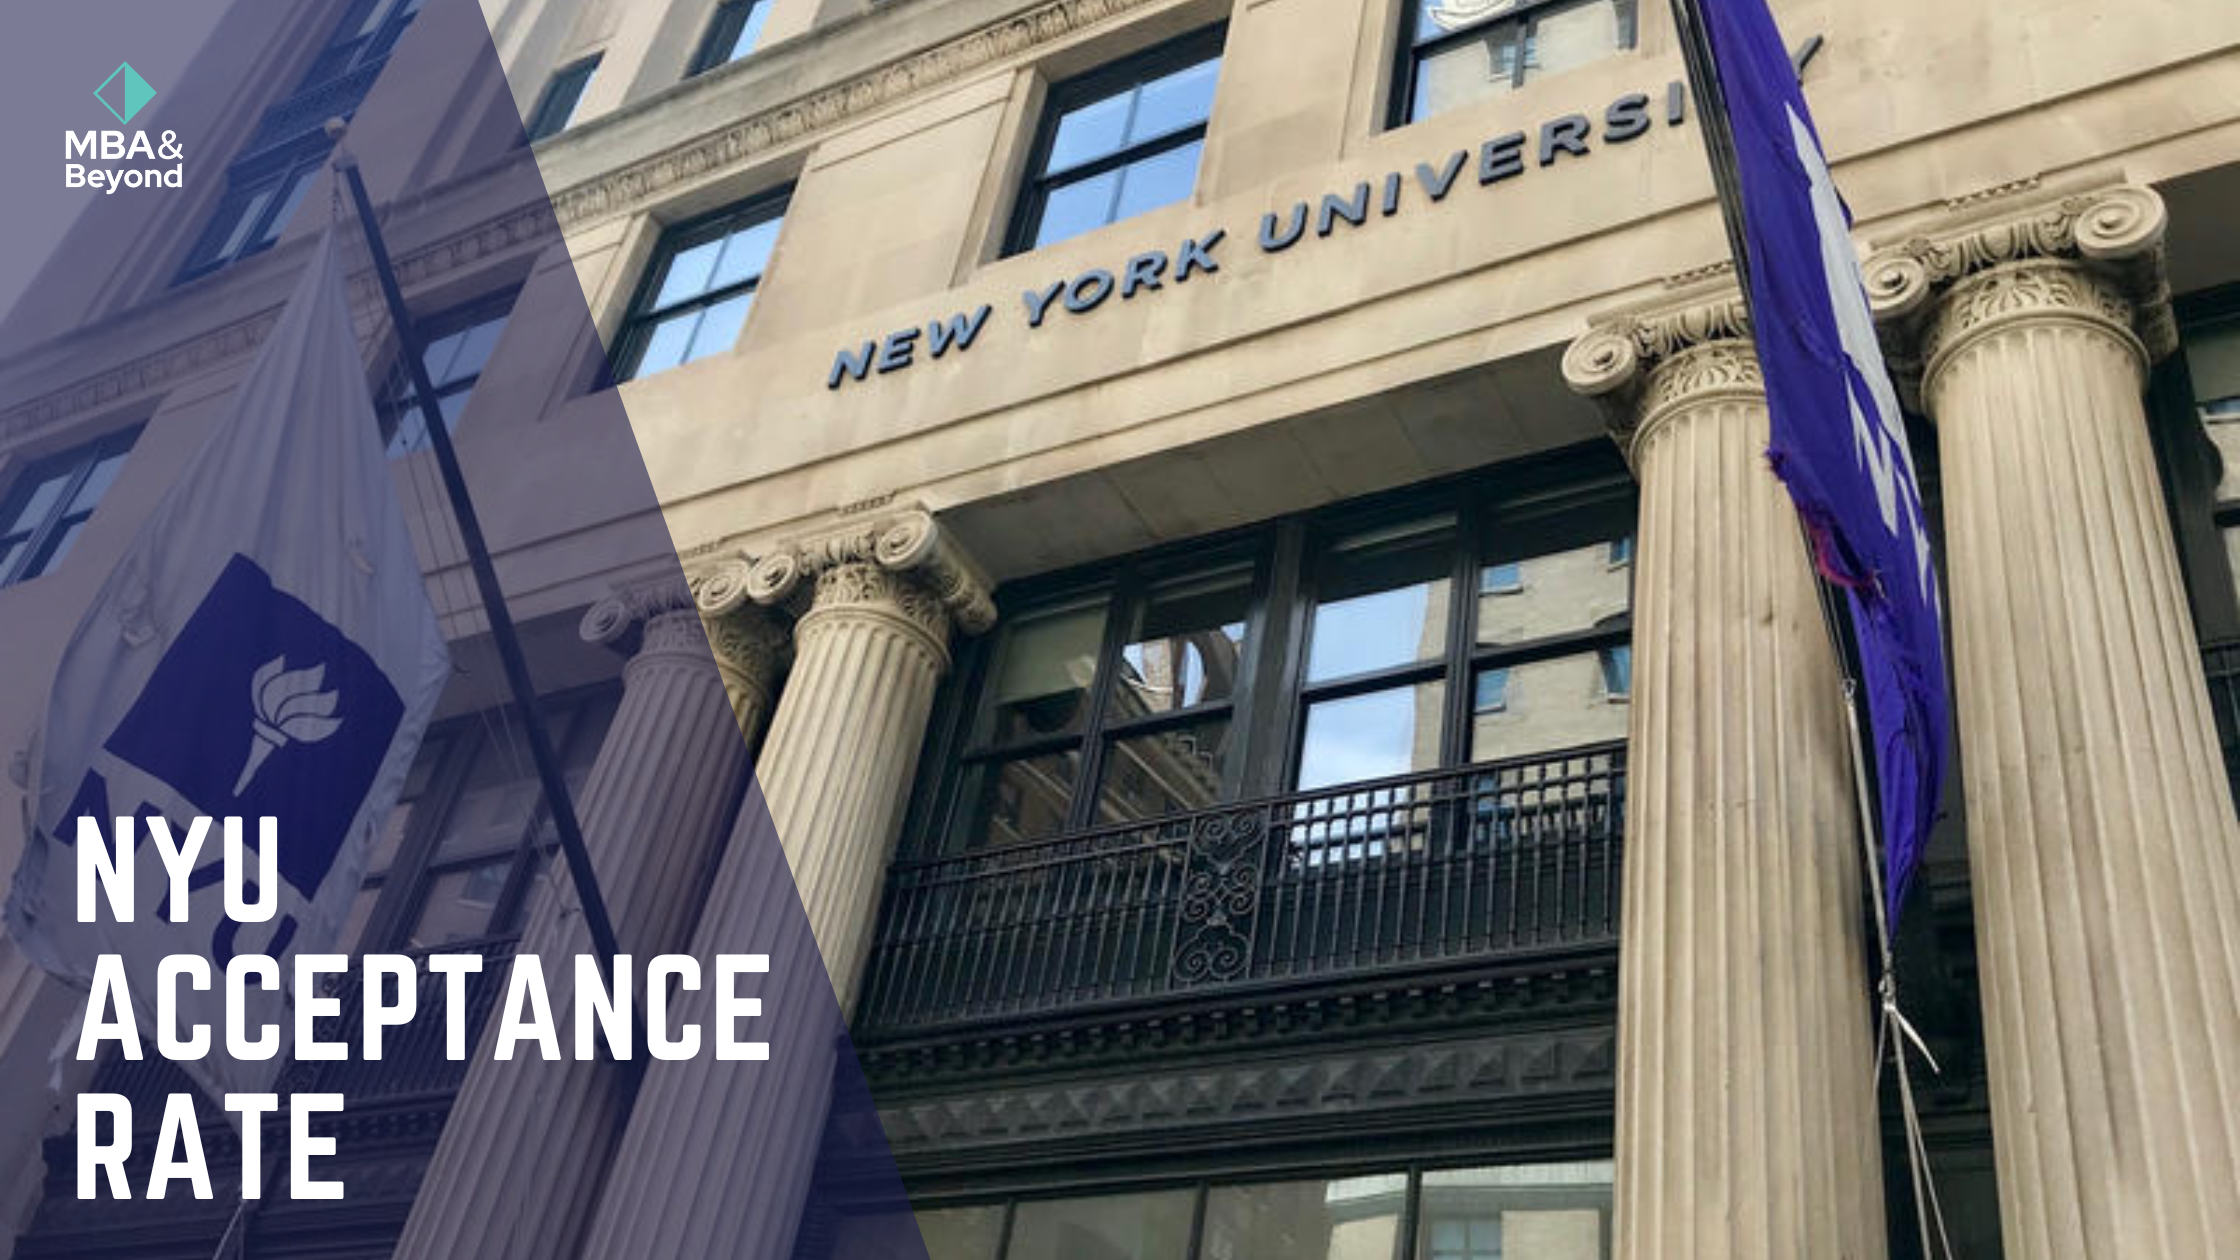 NYU Acceptance Rate: Key Insights and Takeaways